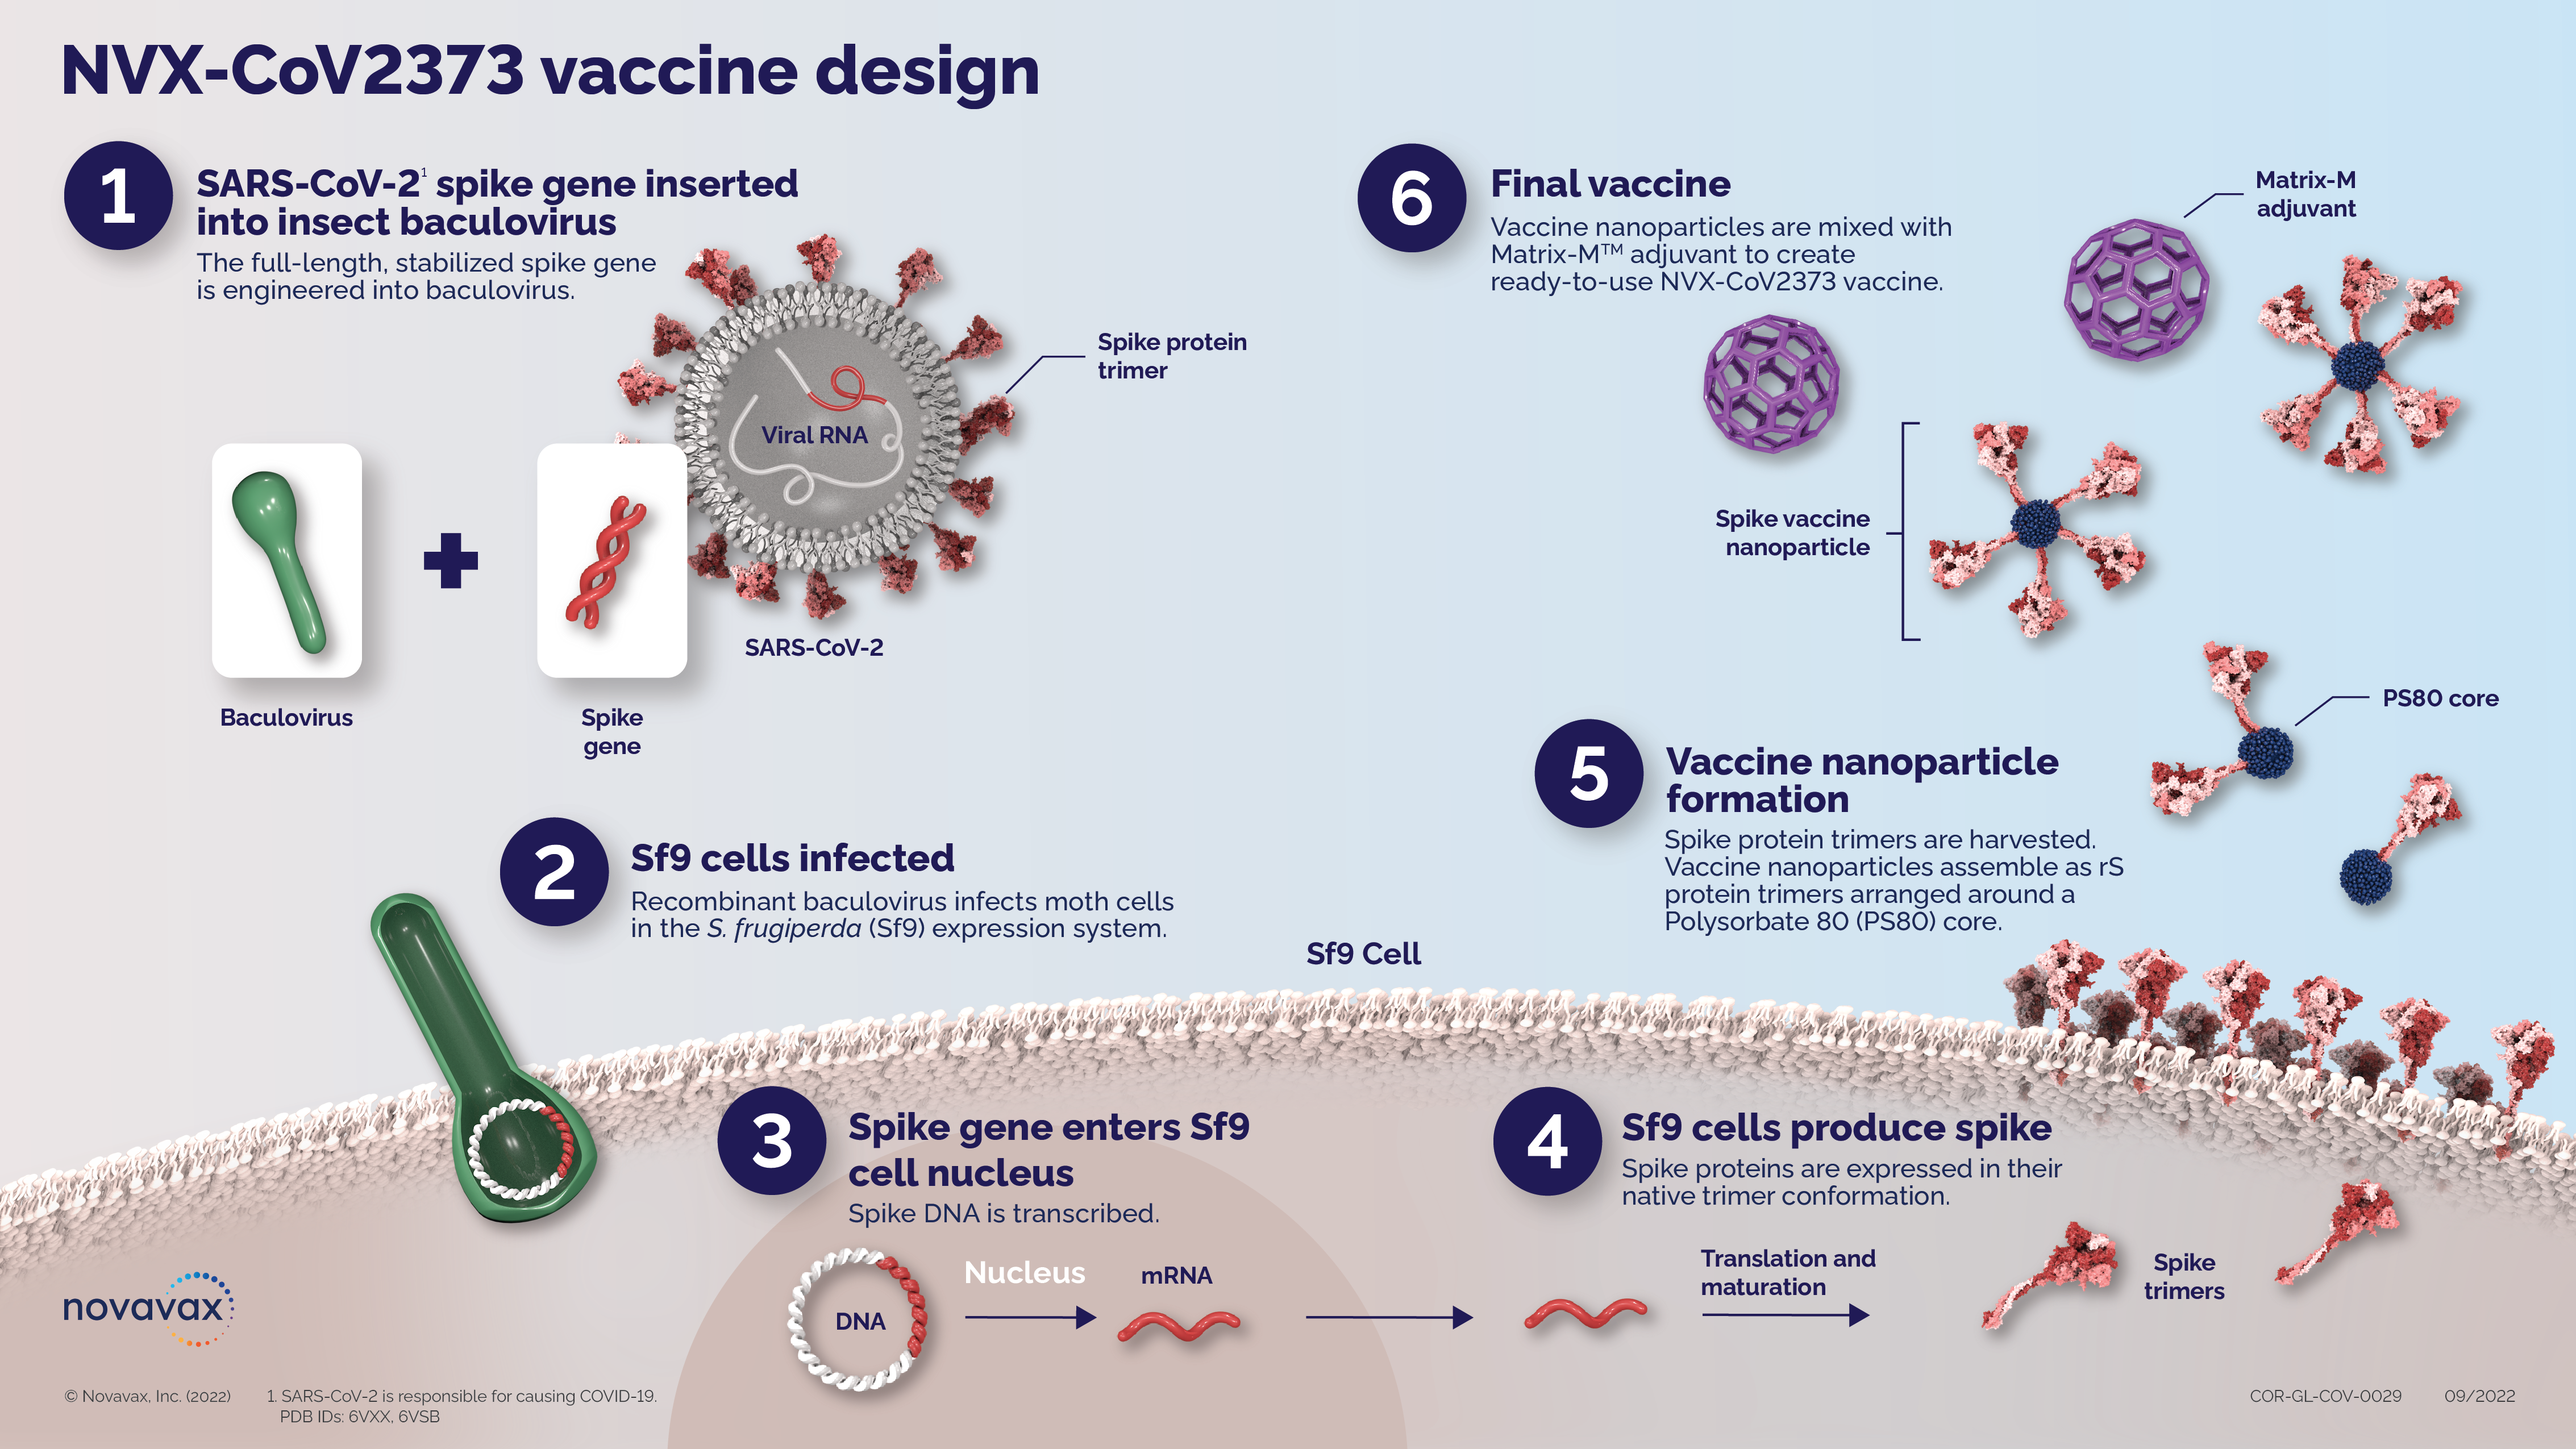 Infographic displaying the NVX-CoV2373 vaccine design